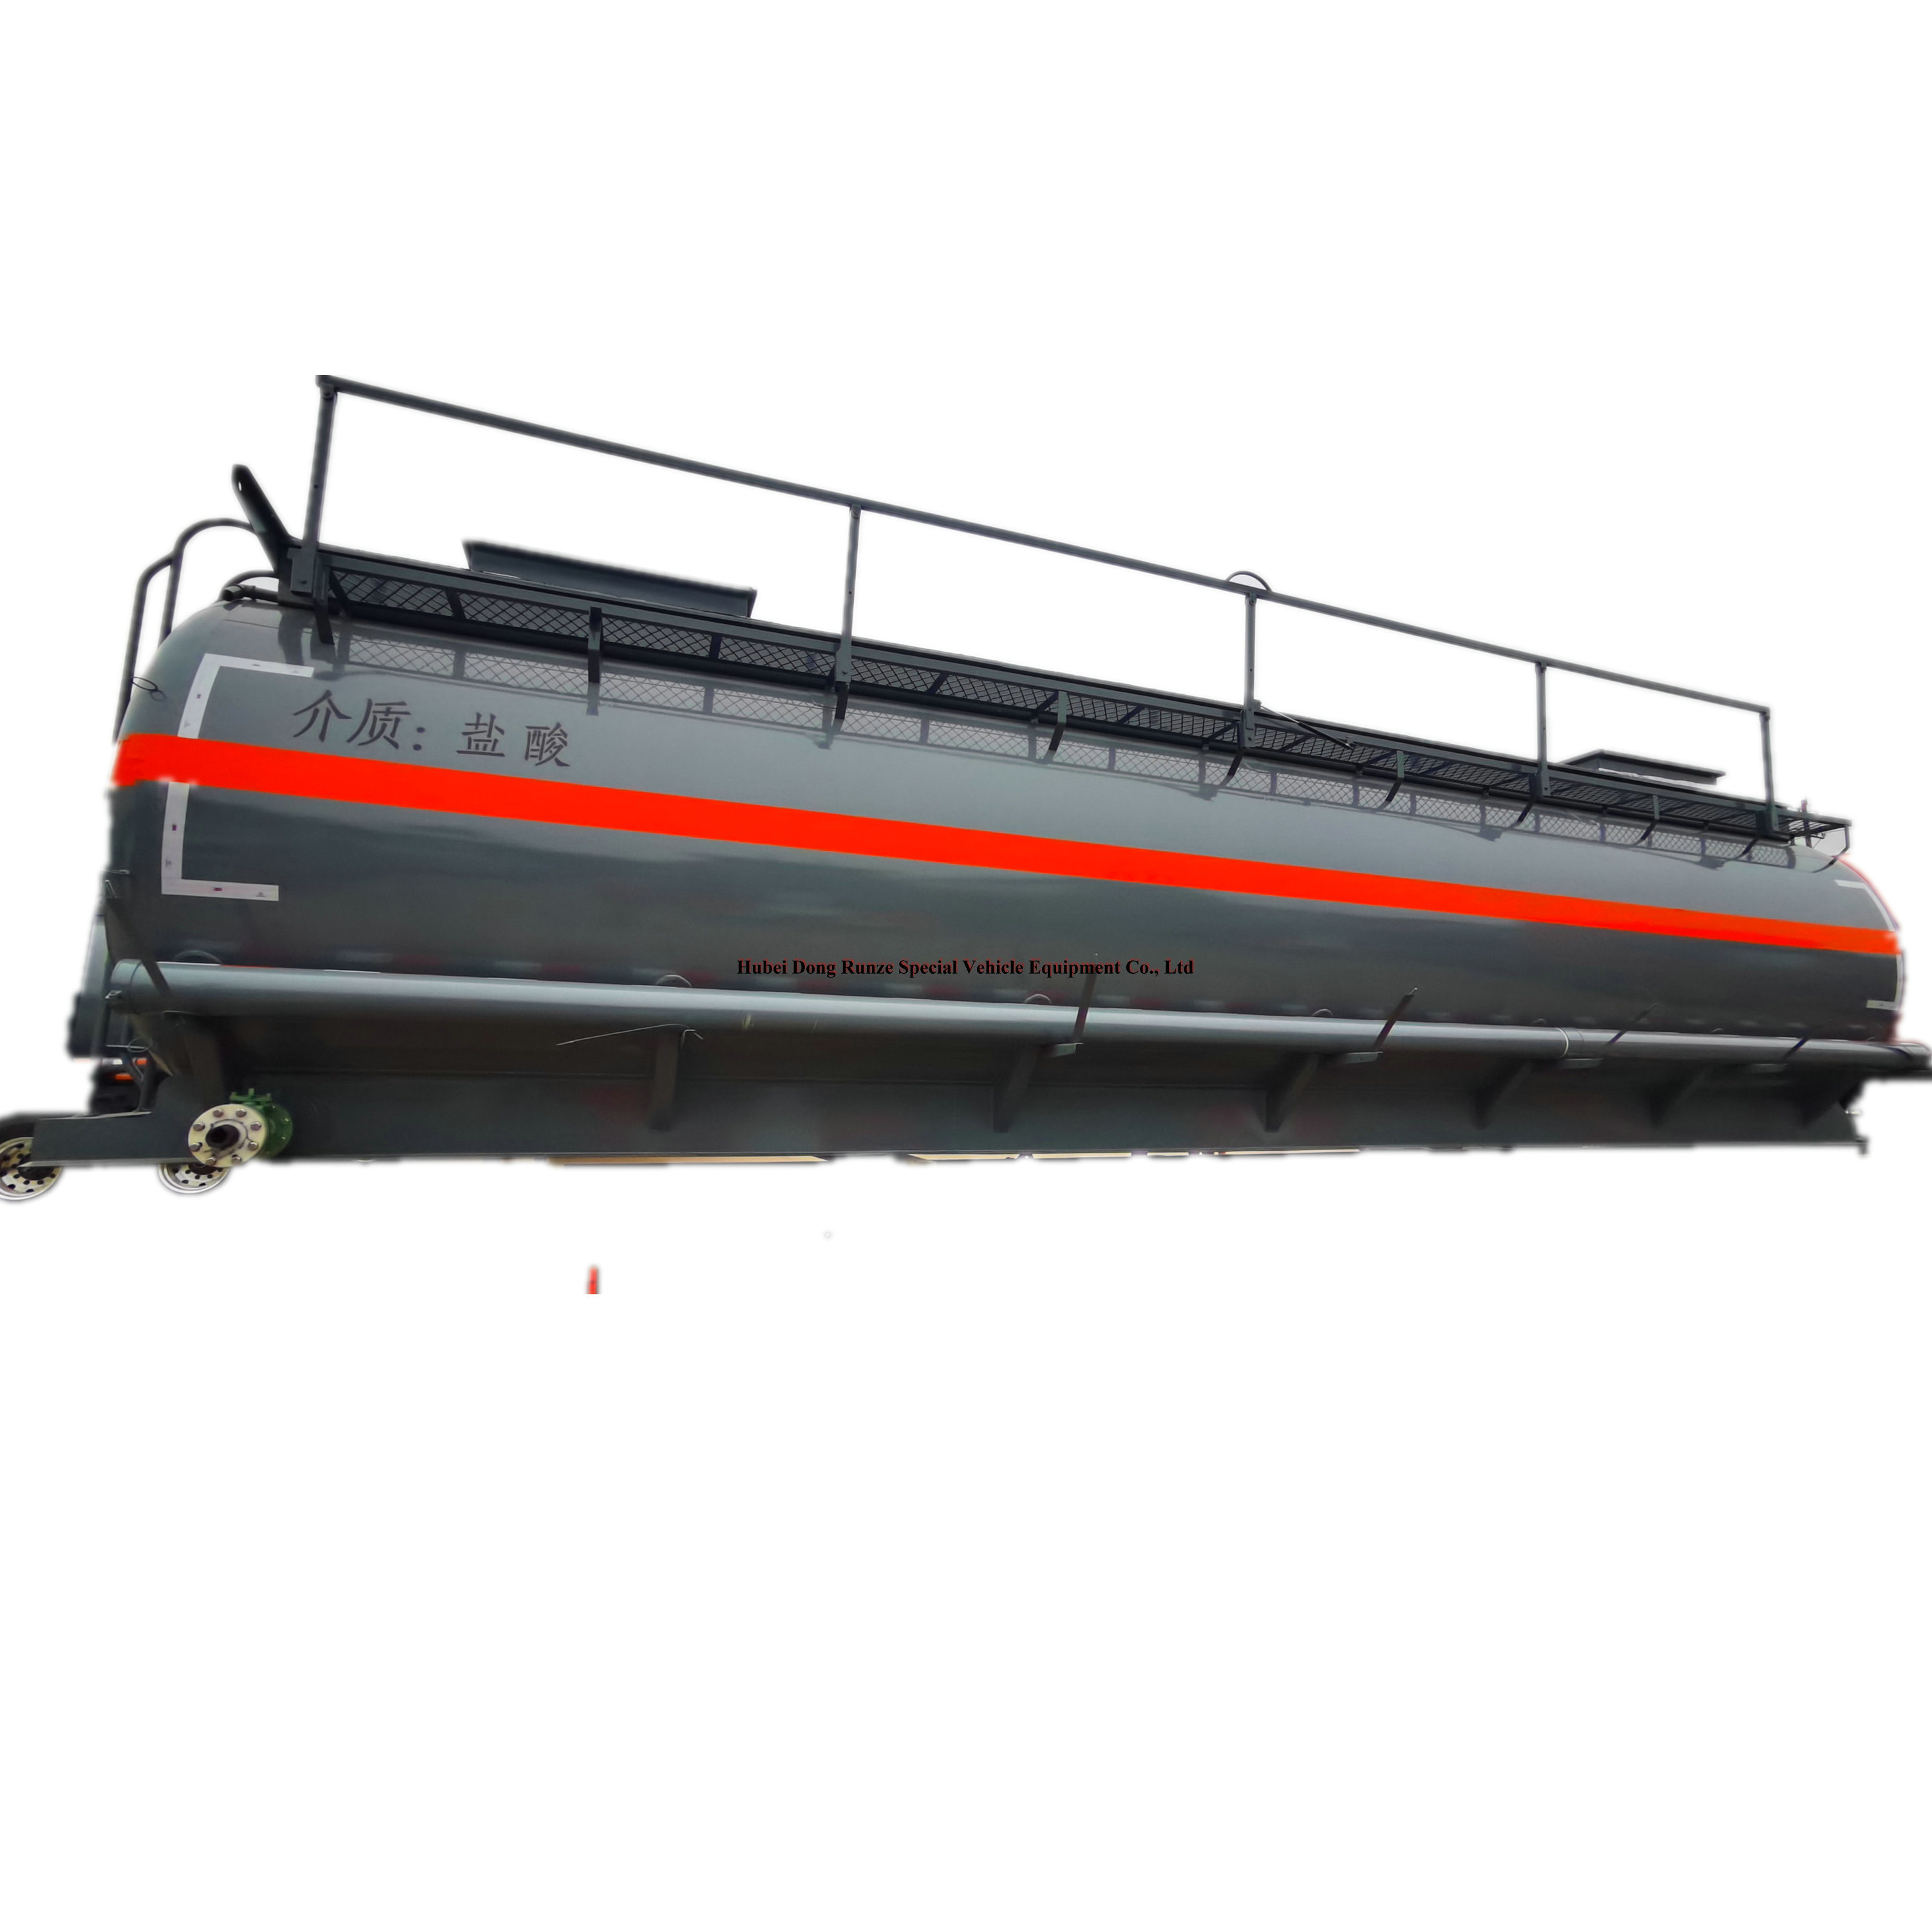 Customize 25m3 PE PTFE Lined Chemical Tank Body for Hydrochloric Acid Trailer Transport 